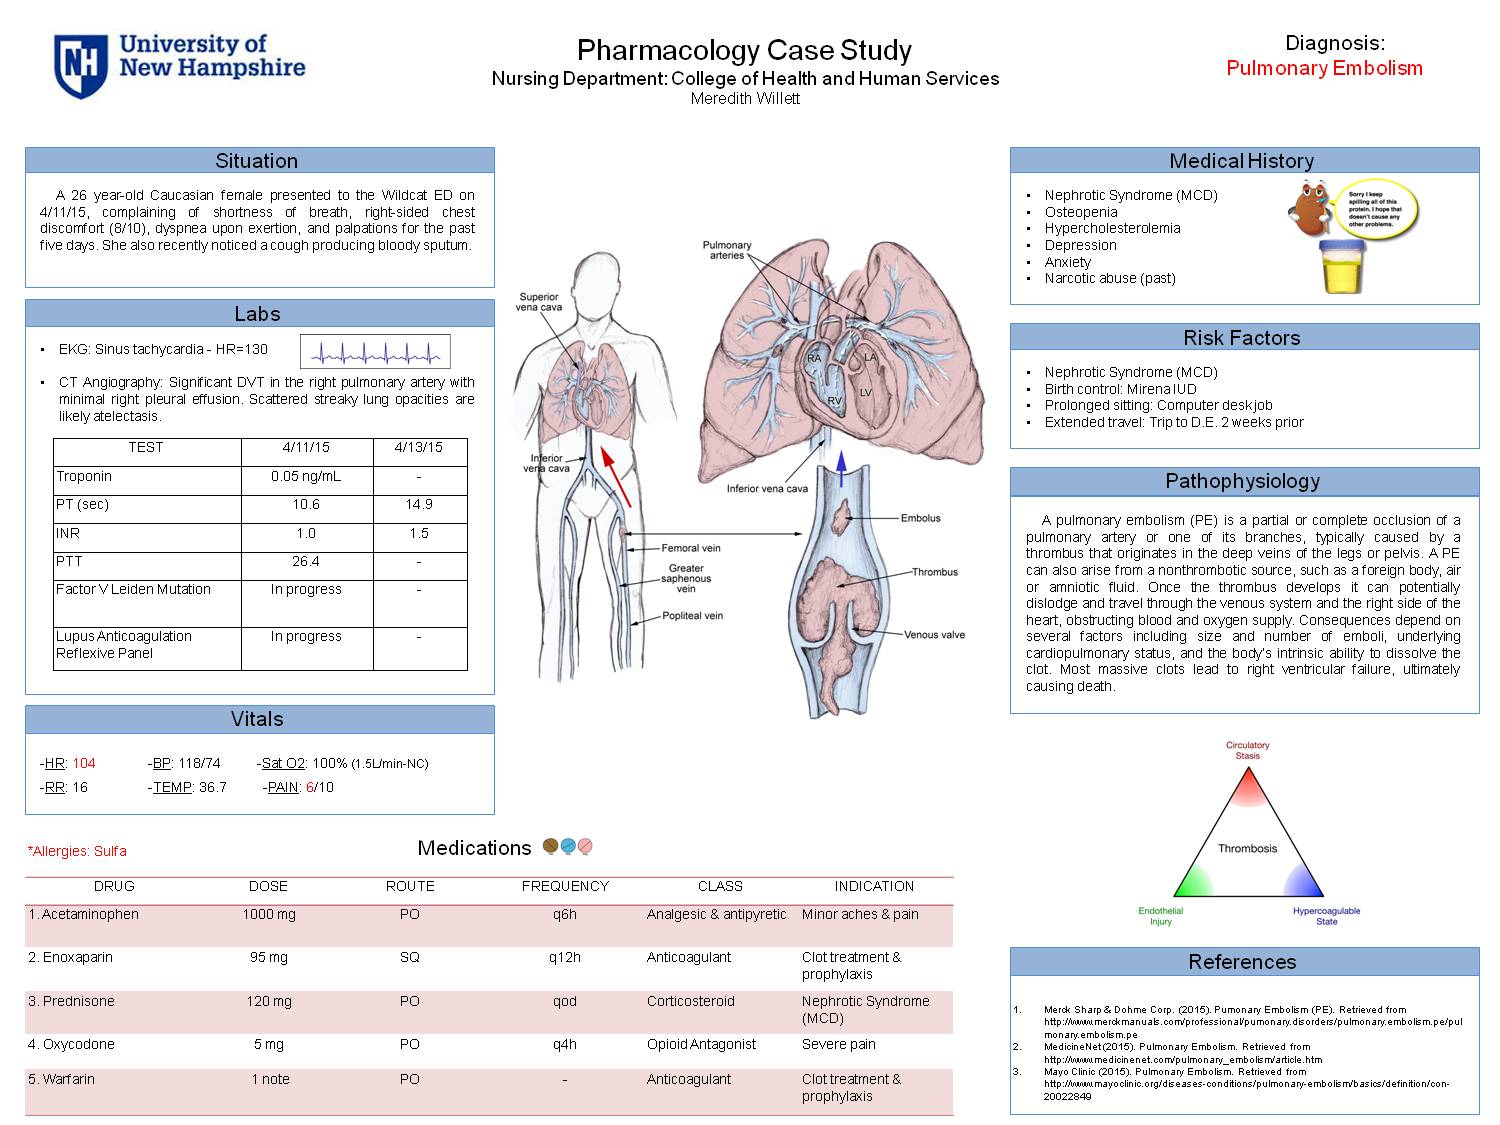 Pharmacology Case Study by mpwillett